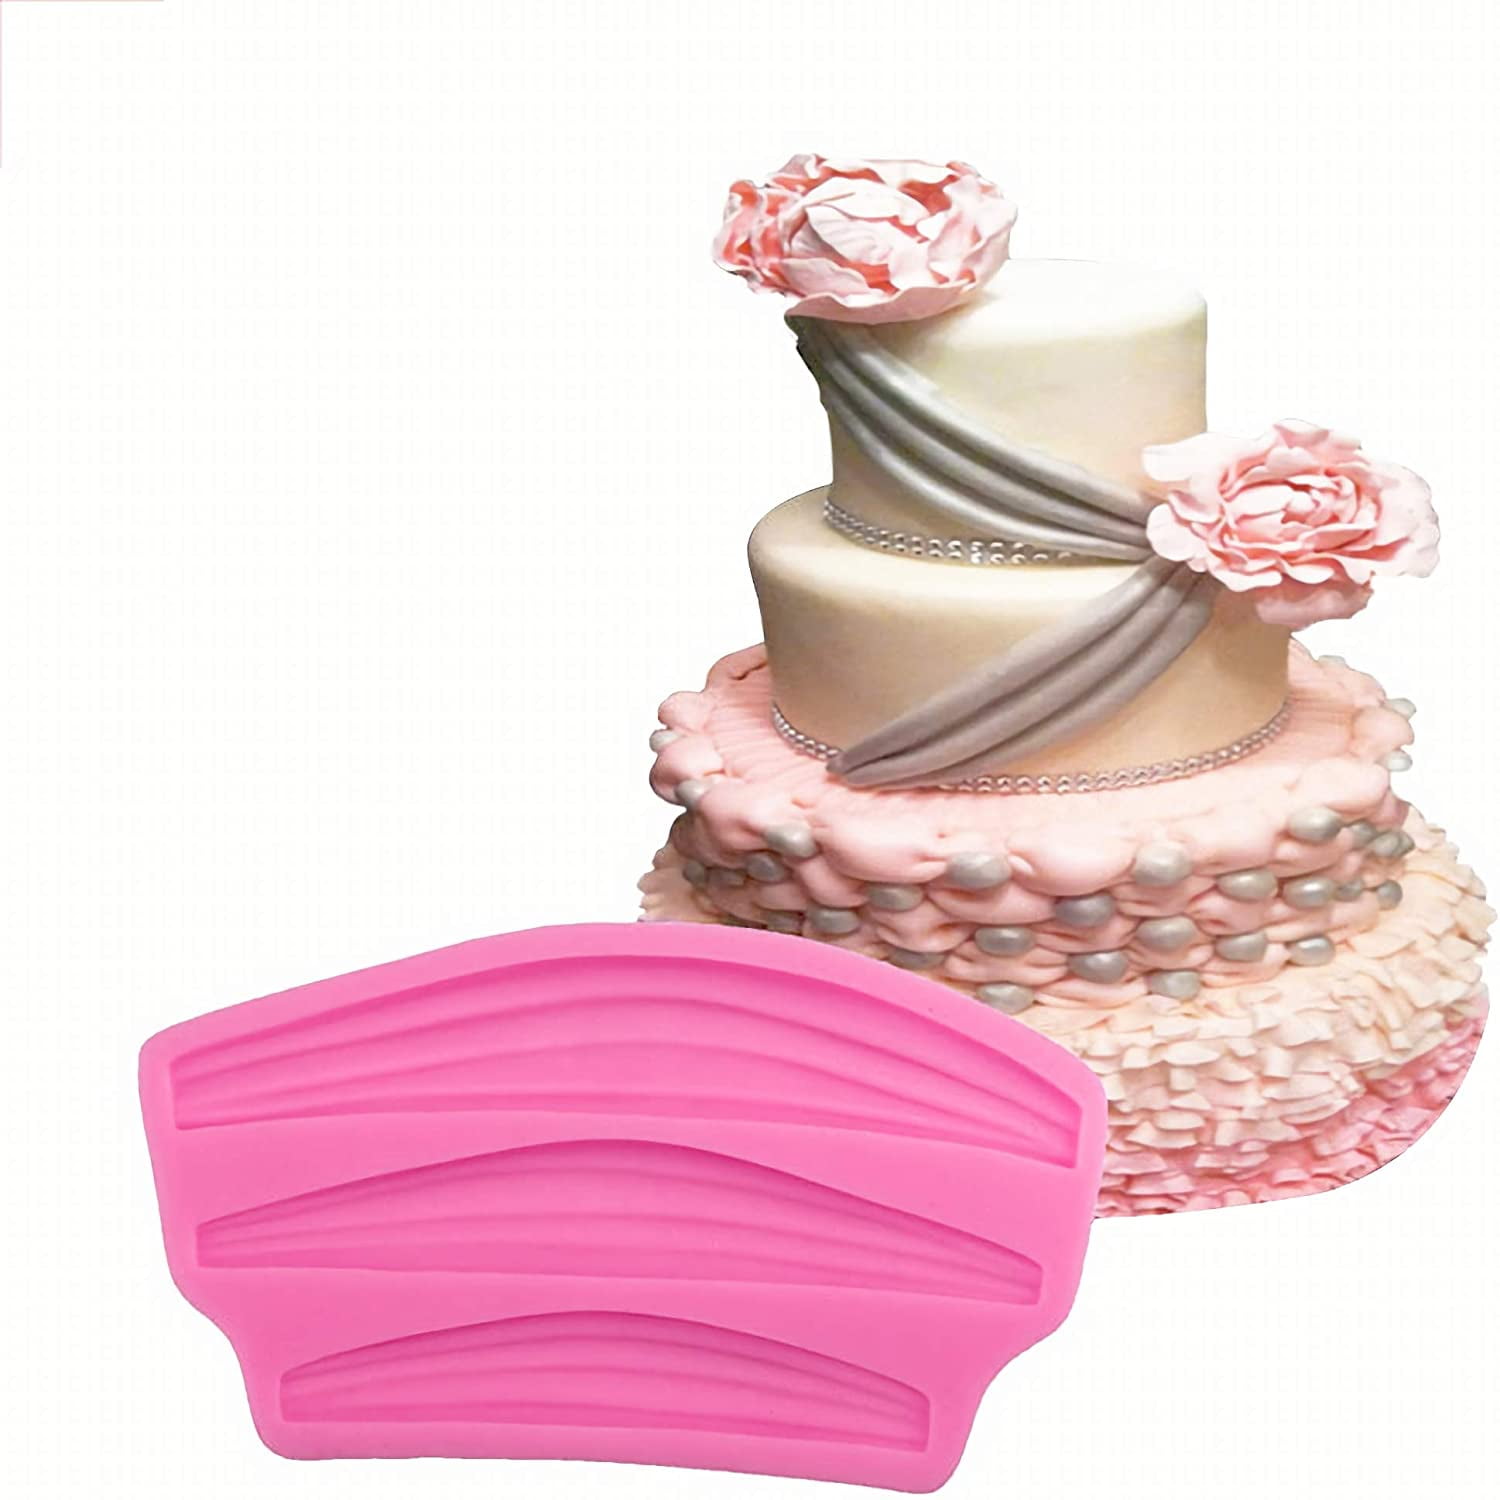 Details about   Chair Silicone Mold DIY Hand-made Cake Fondant Clay Soap Mold Decorating Tools 